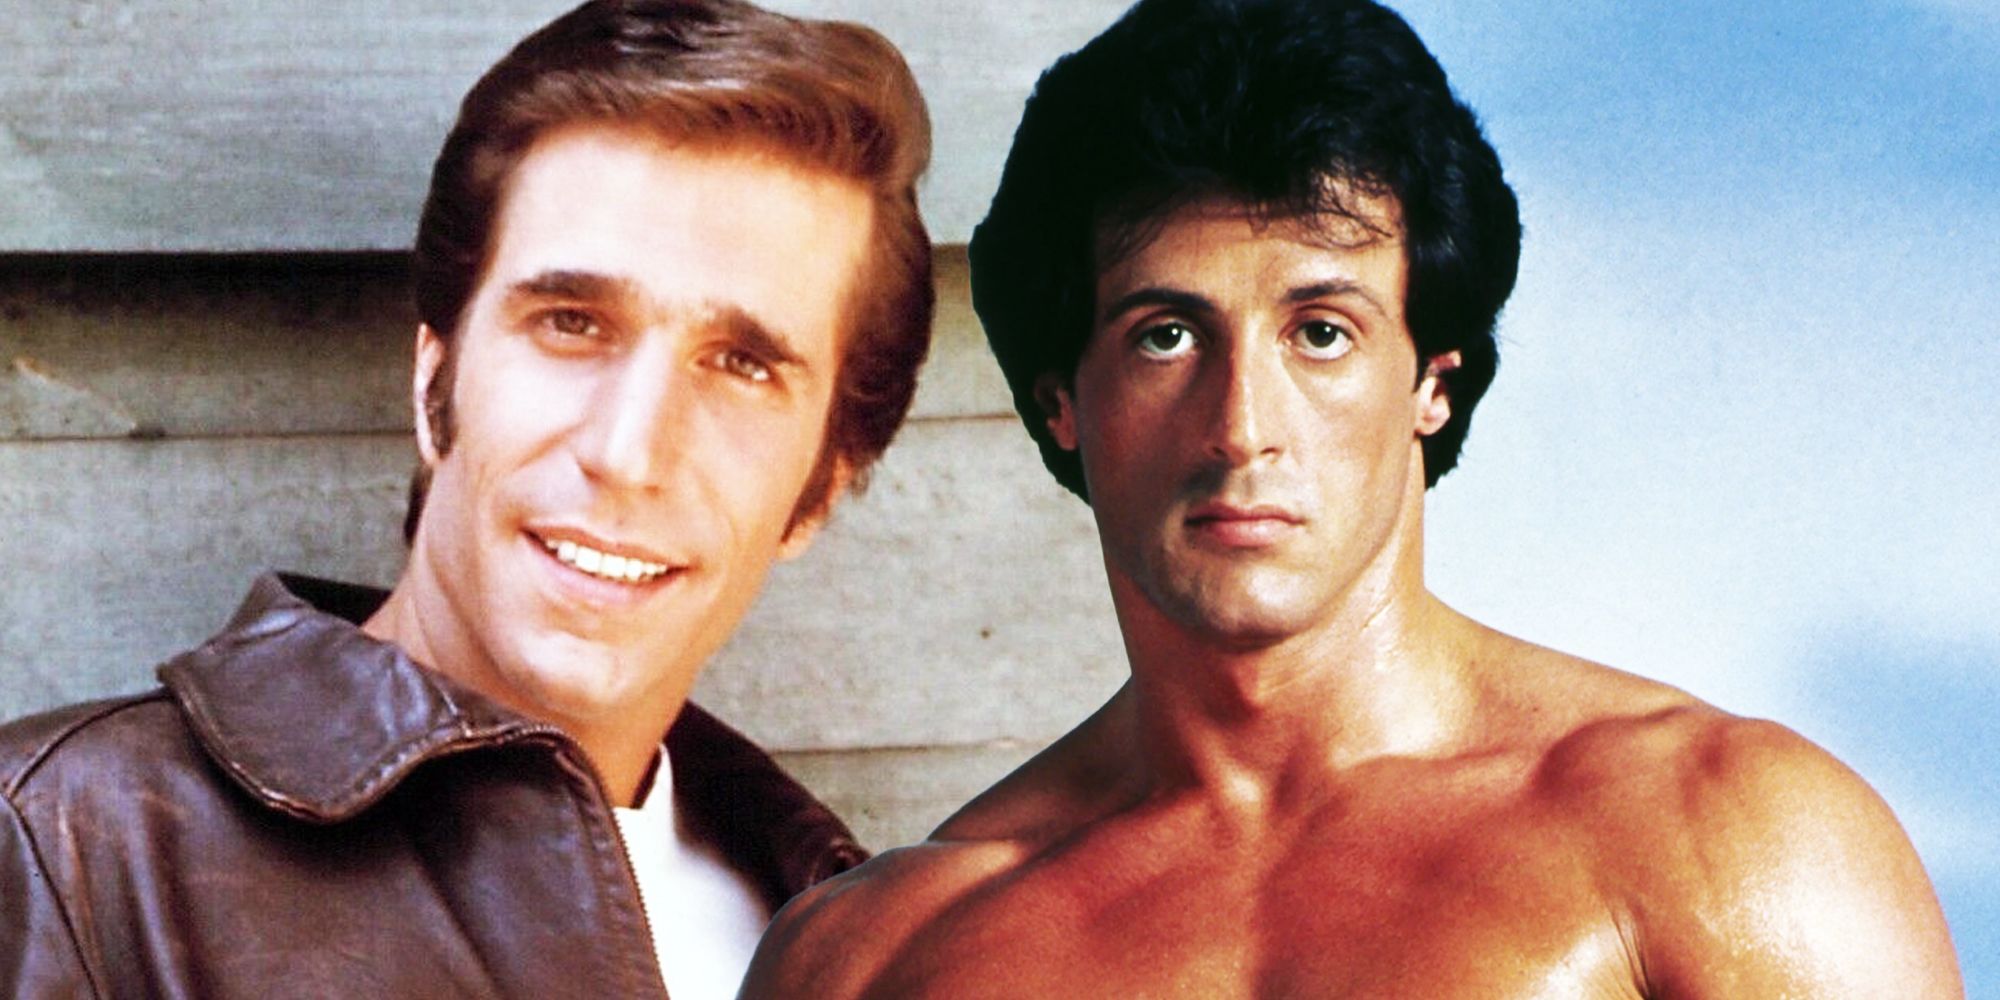 Rocky Balboa and Fonzie from Happy Days